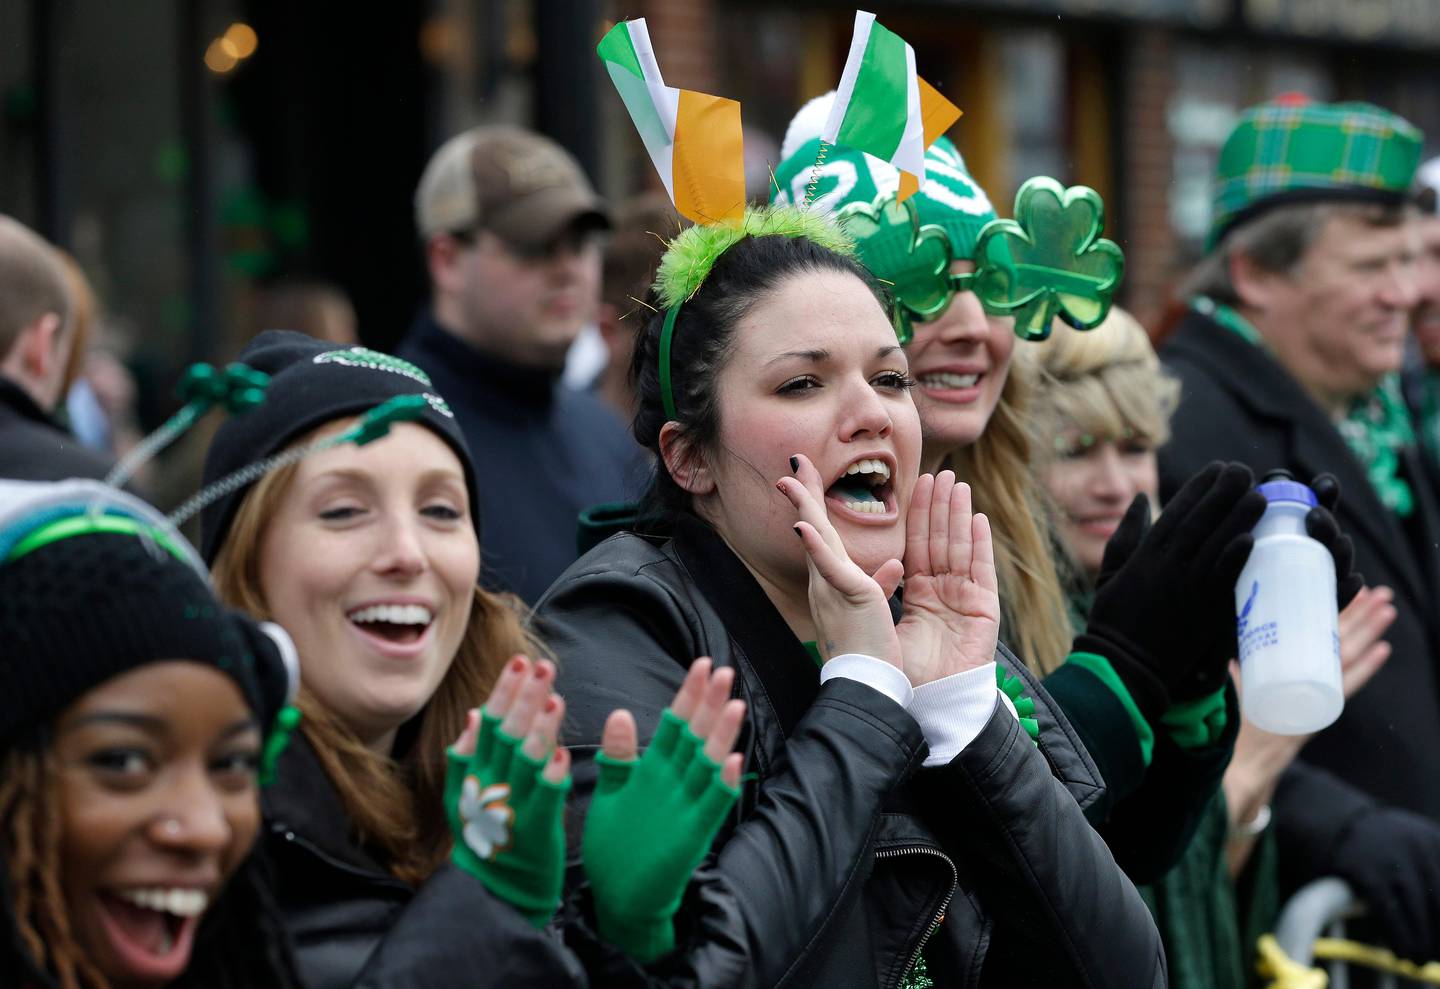 Spectators cheer during the St. Patrick's Day parade, Sunday, March 15, 2015, in Boston's South Boston neighborhood. Sunday's parade through the traditionally Irish-American enclave was shorter than years past: So much snow remains piled on sidewalks after the brutal winter that the city has had to cut the route in half. (AP Photo/Steven Senne)